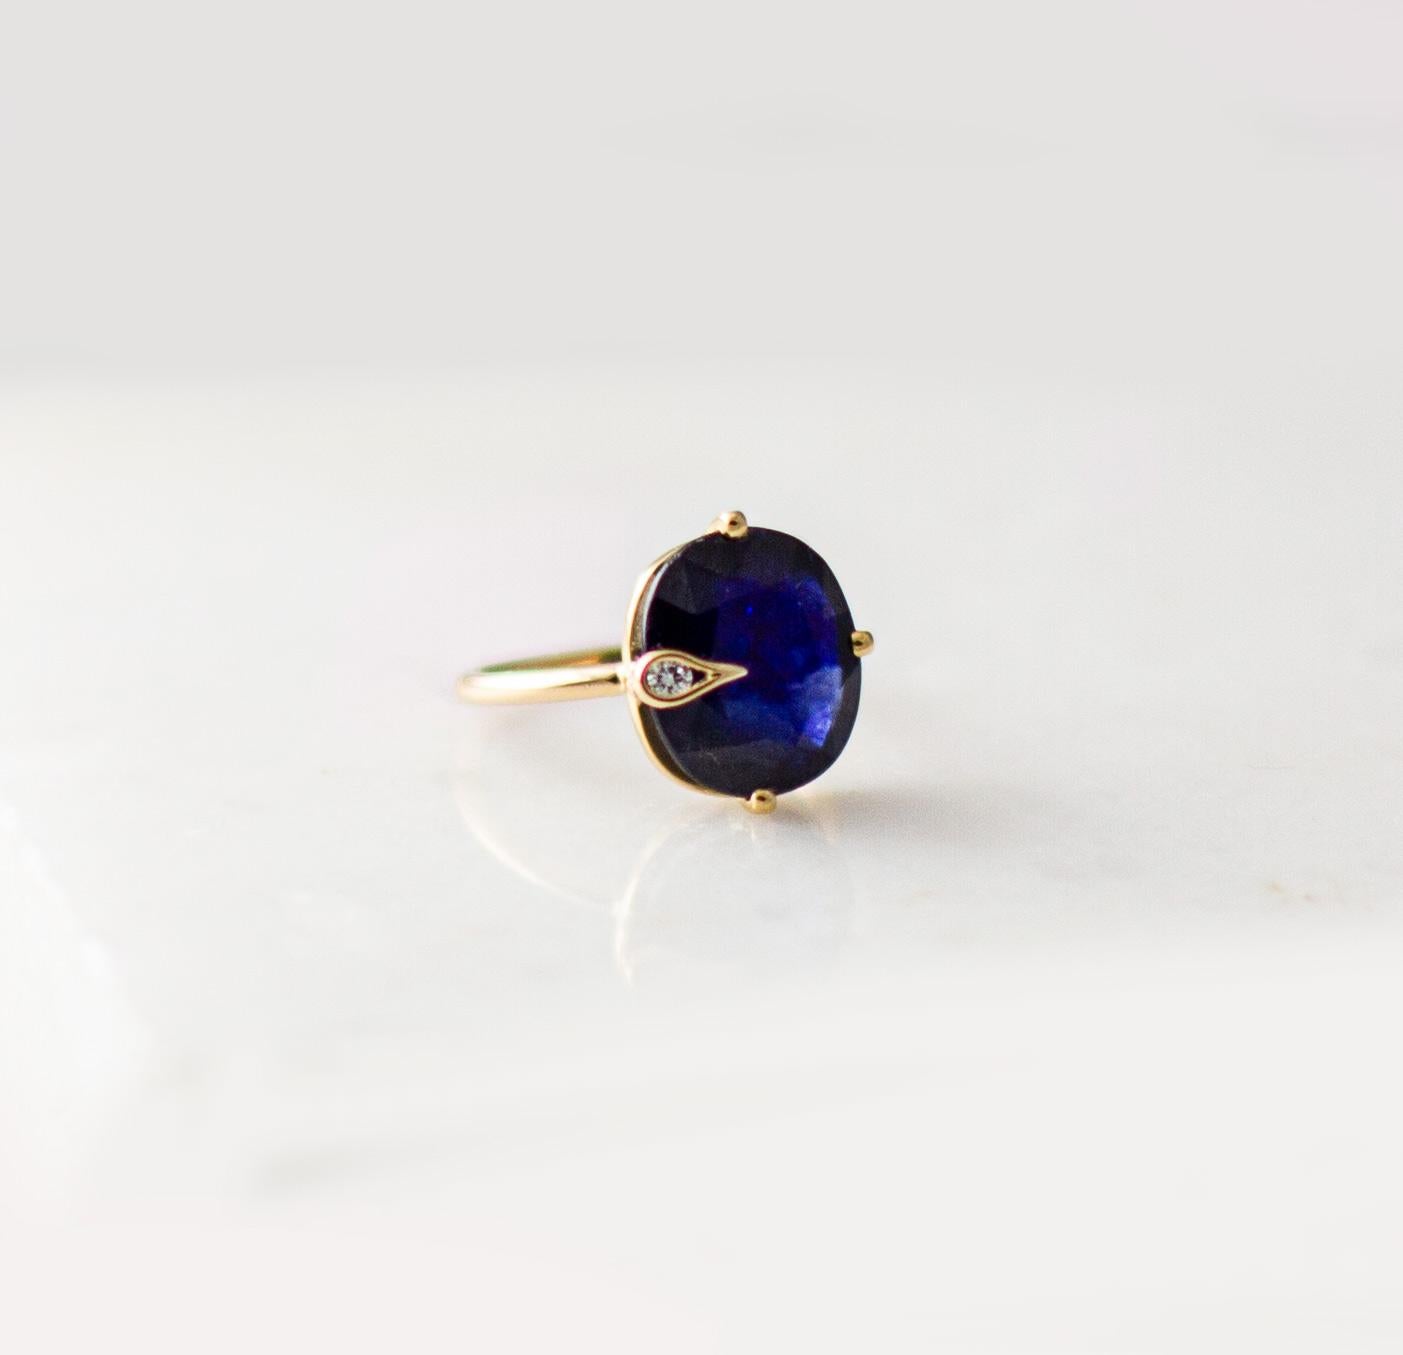 This contemporary Peacock ring features a oval-cut blue sapphire weighing 4.17 carats and diamond accents, set in 18 karat yellow gold. The ring is comfortable to wear, and the gemstone is sure to catch the attention of anyone who sees it.

We use